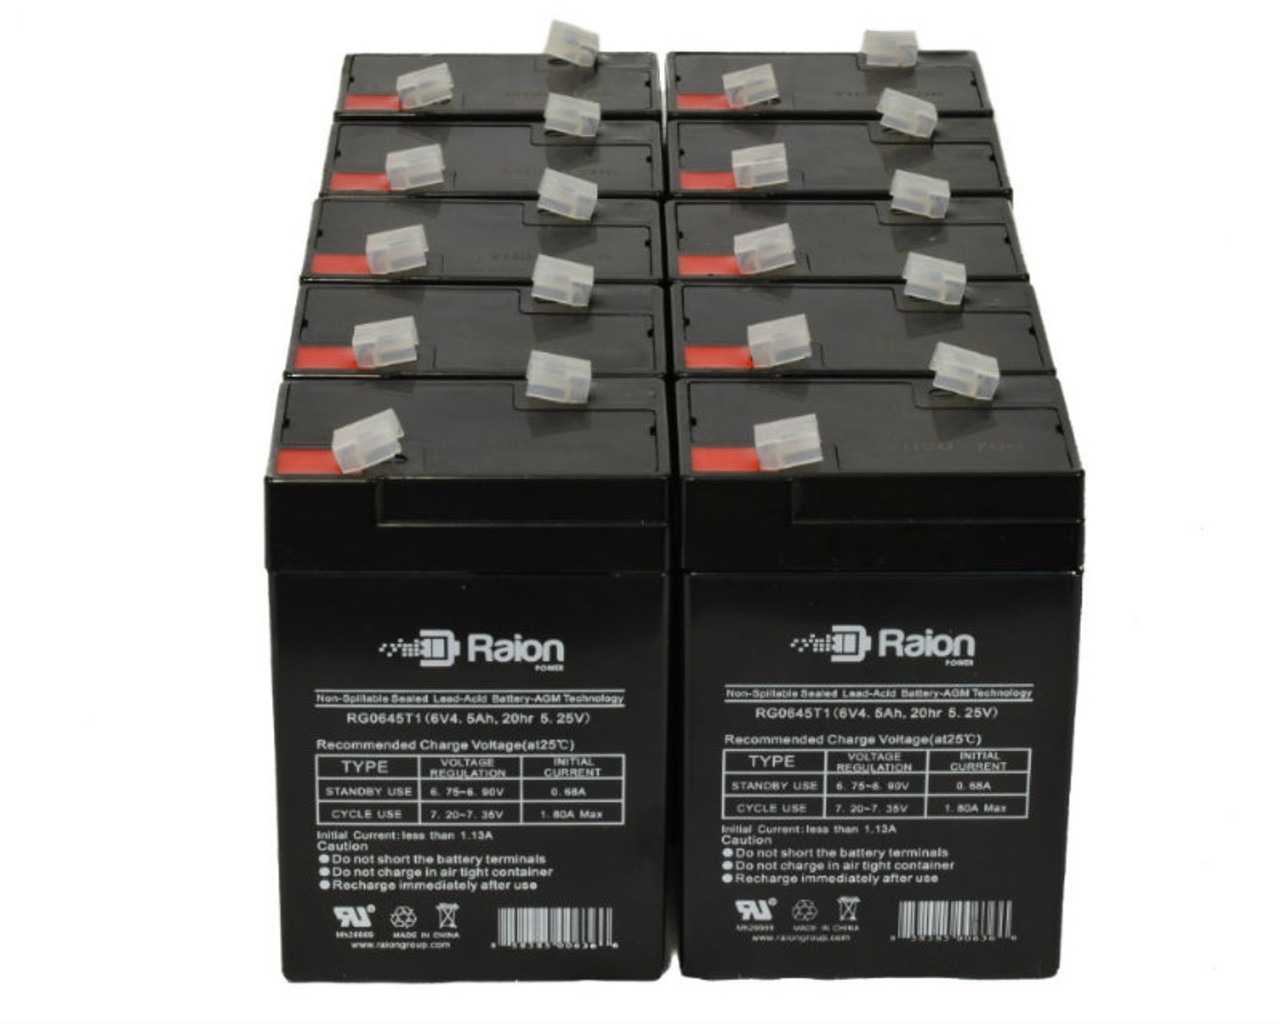 Raion Power 6V 4.5Ah Replacement Emergency Light Battery for IBT BT4-6S - 10 Pack